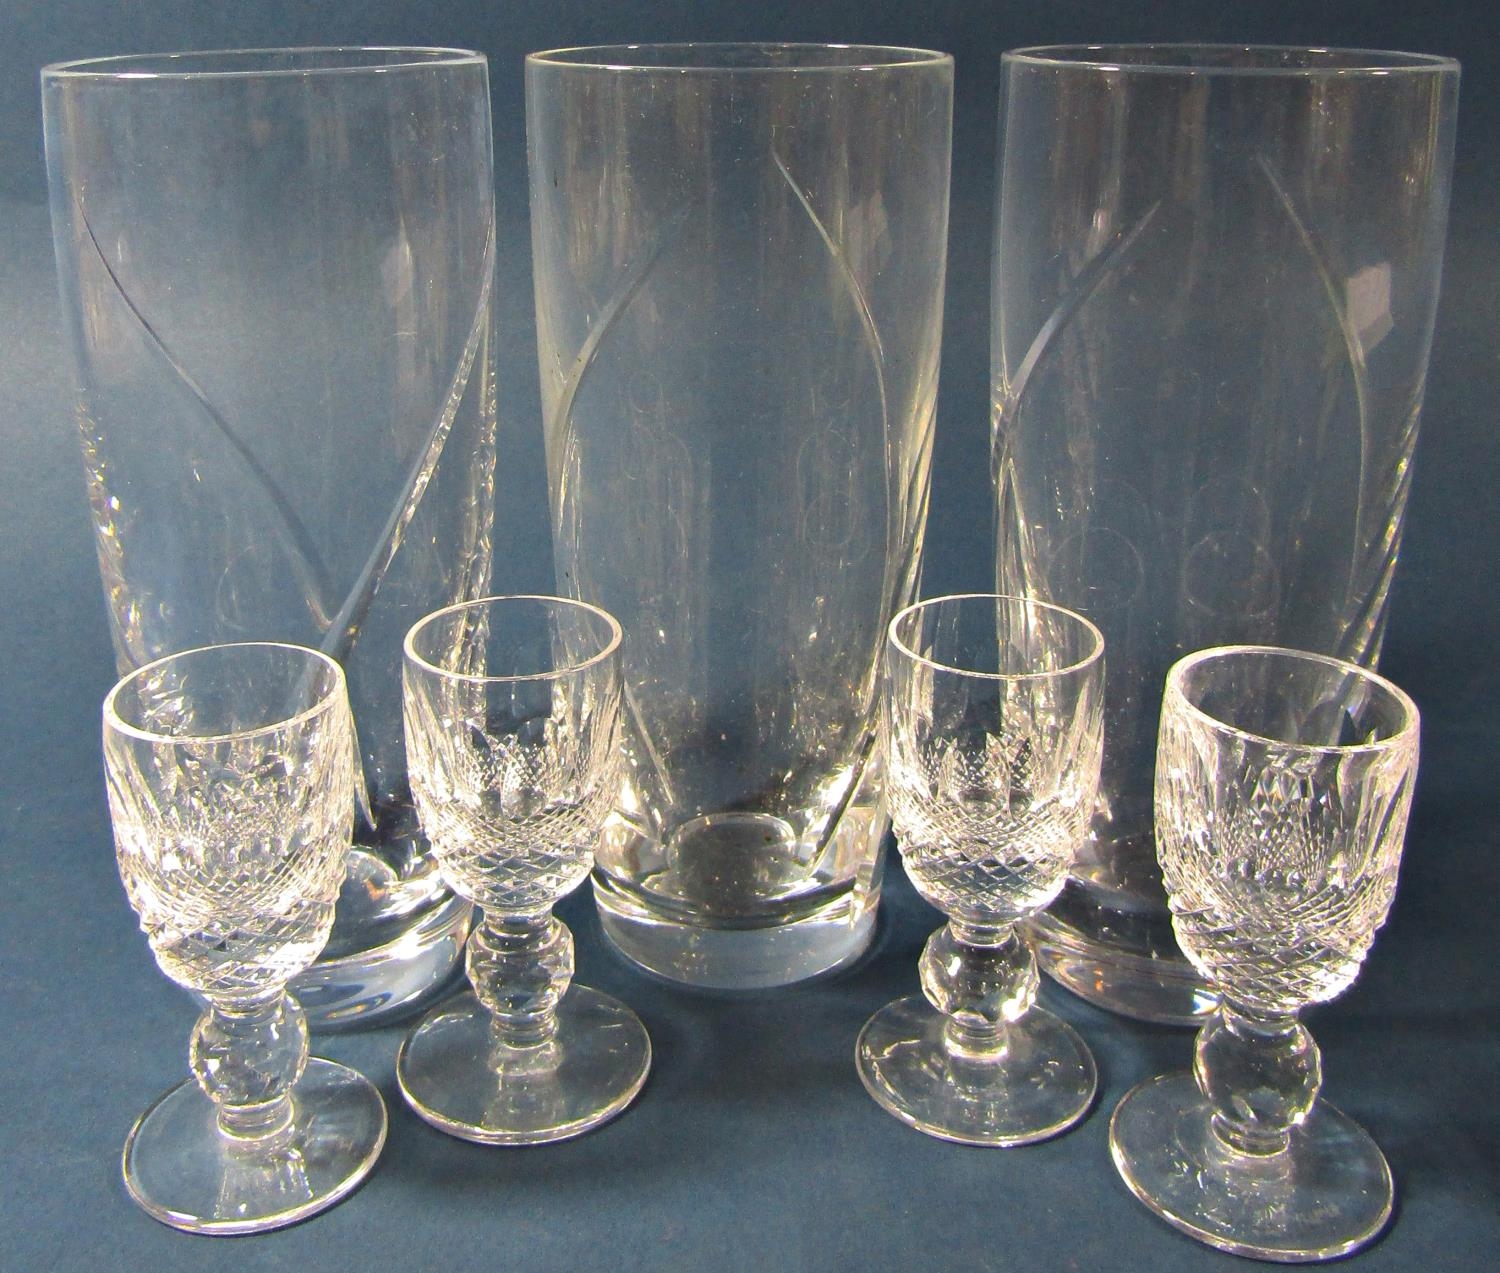 A miscellaneous collection of glass ware including a Smokey brown pitcher and six square shot